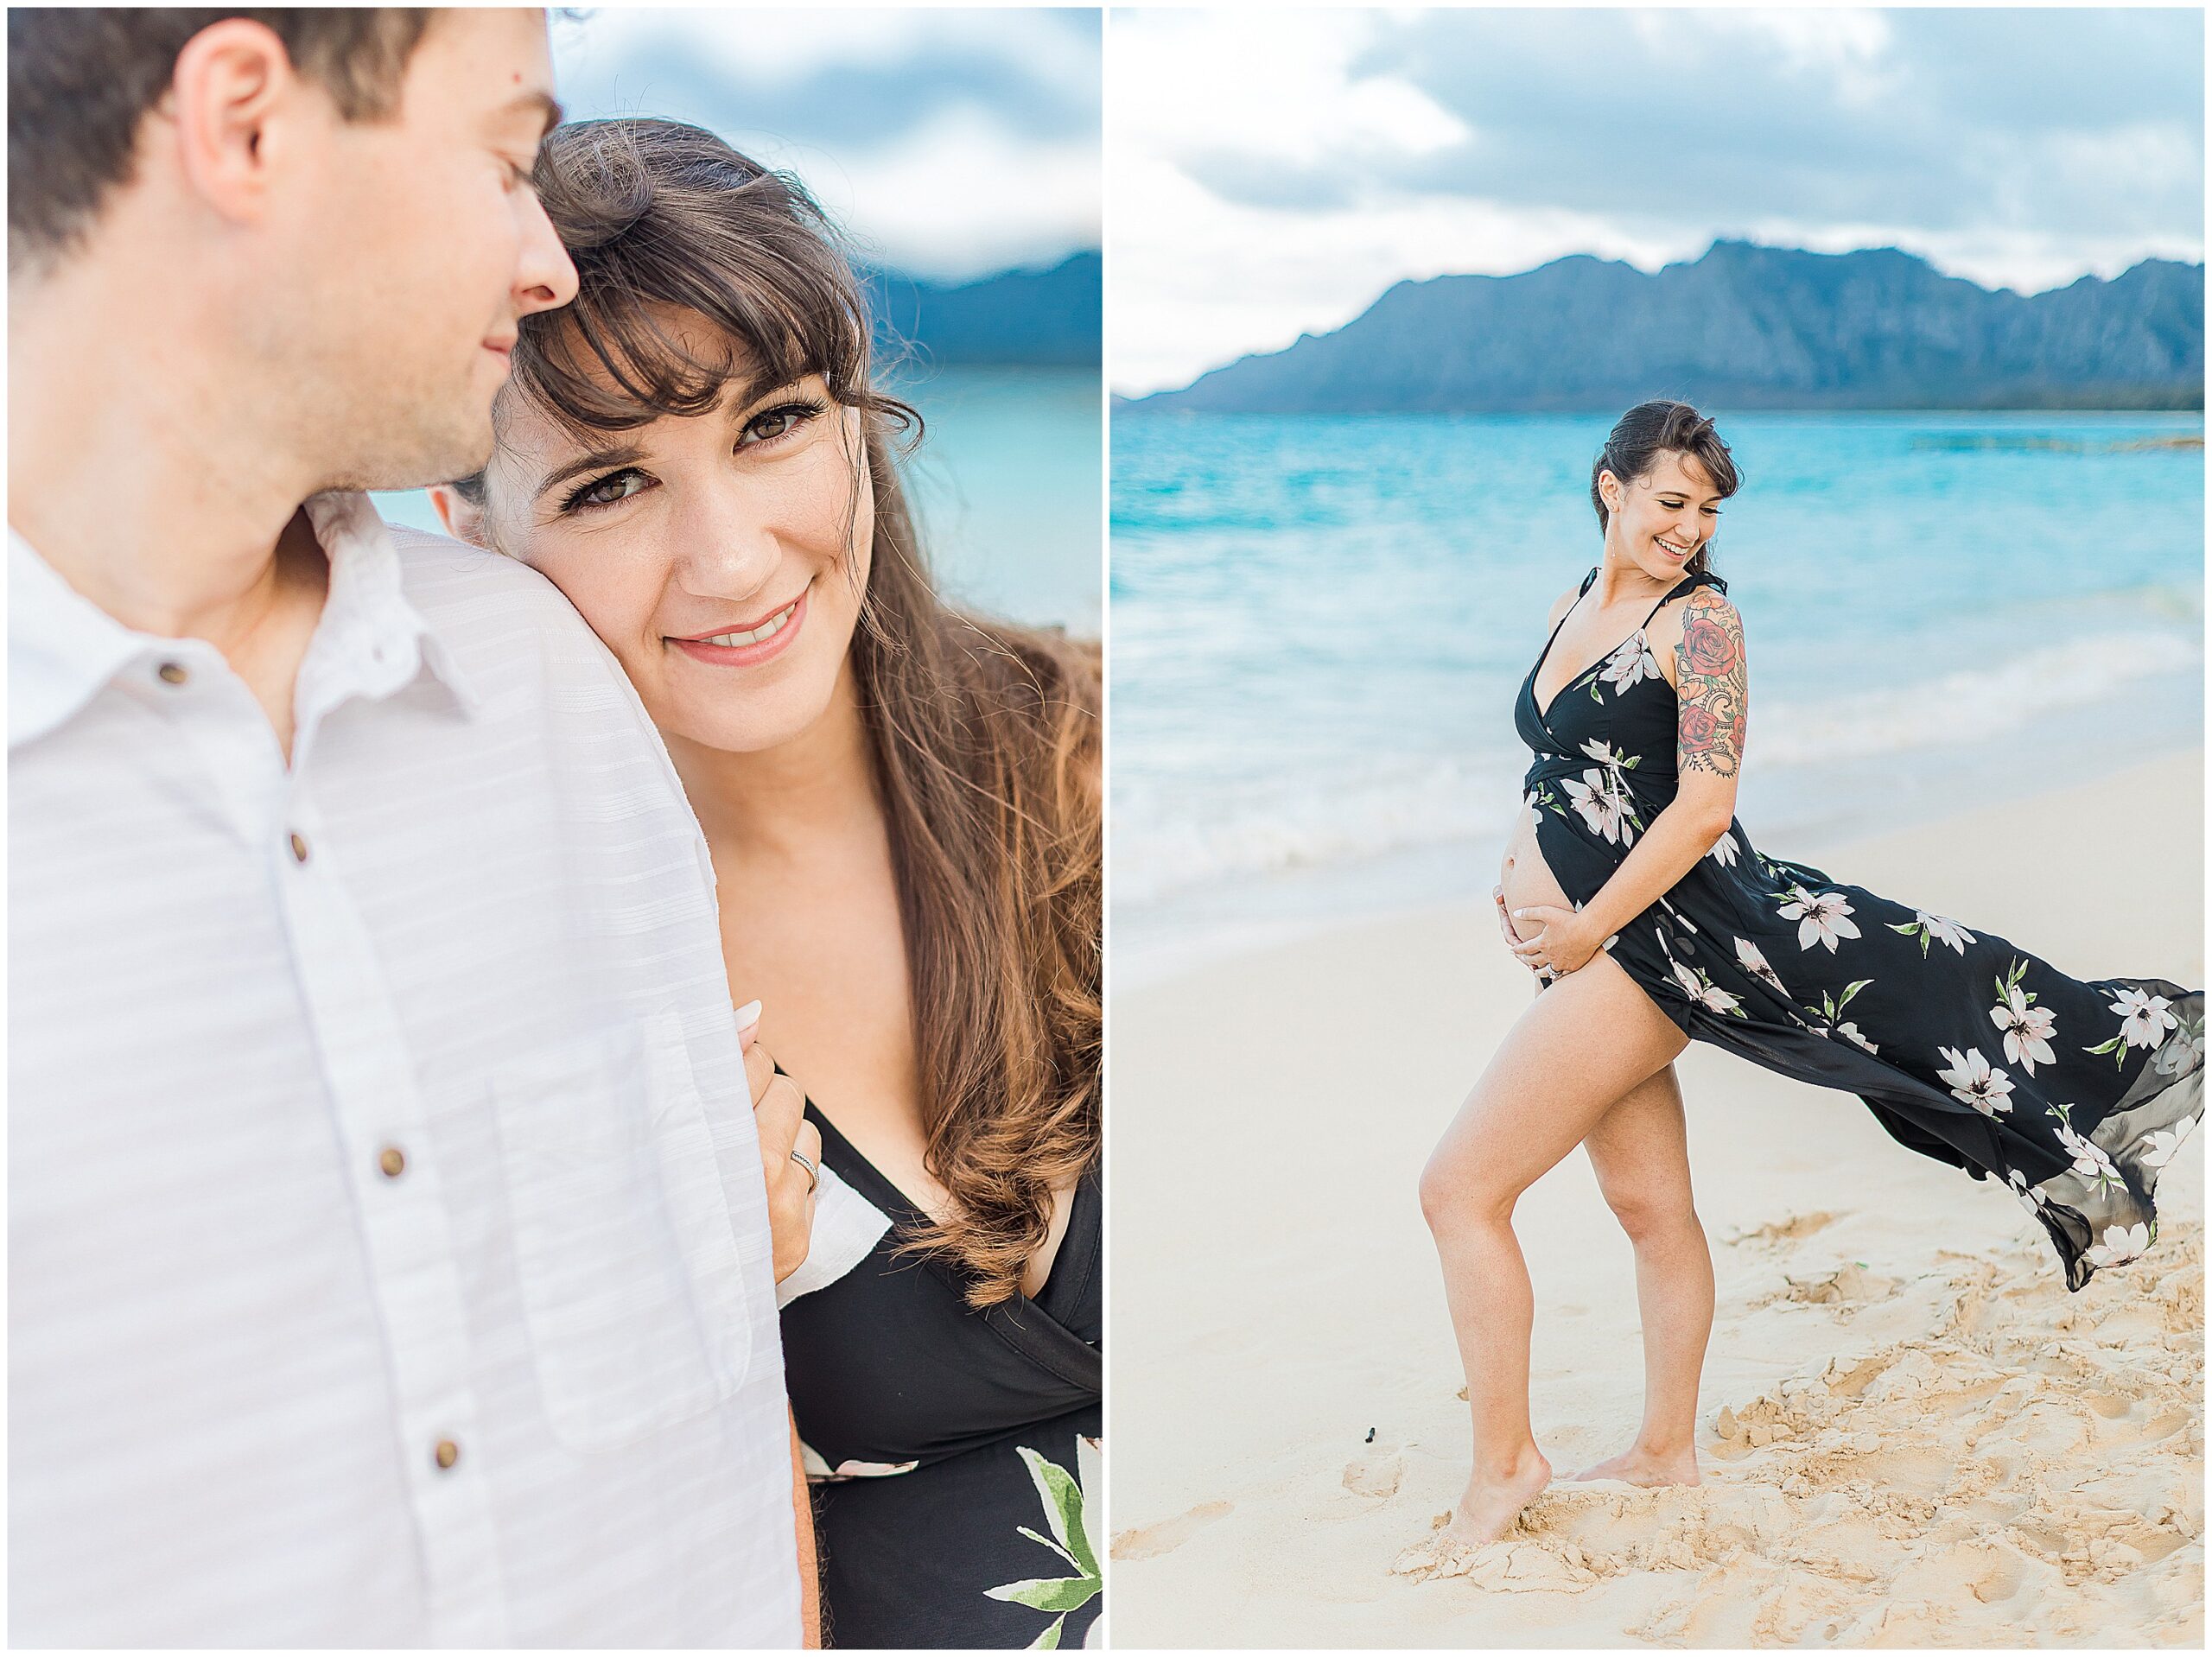 gallery of images displaying maternity portraits on the beach